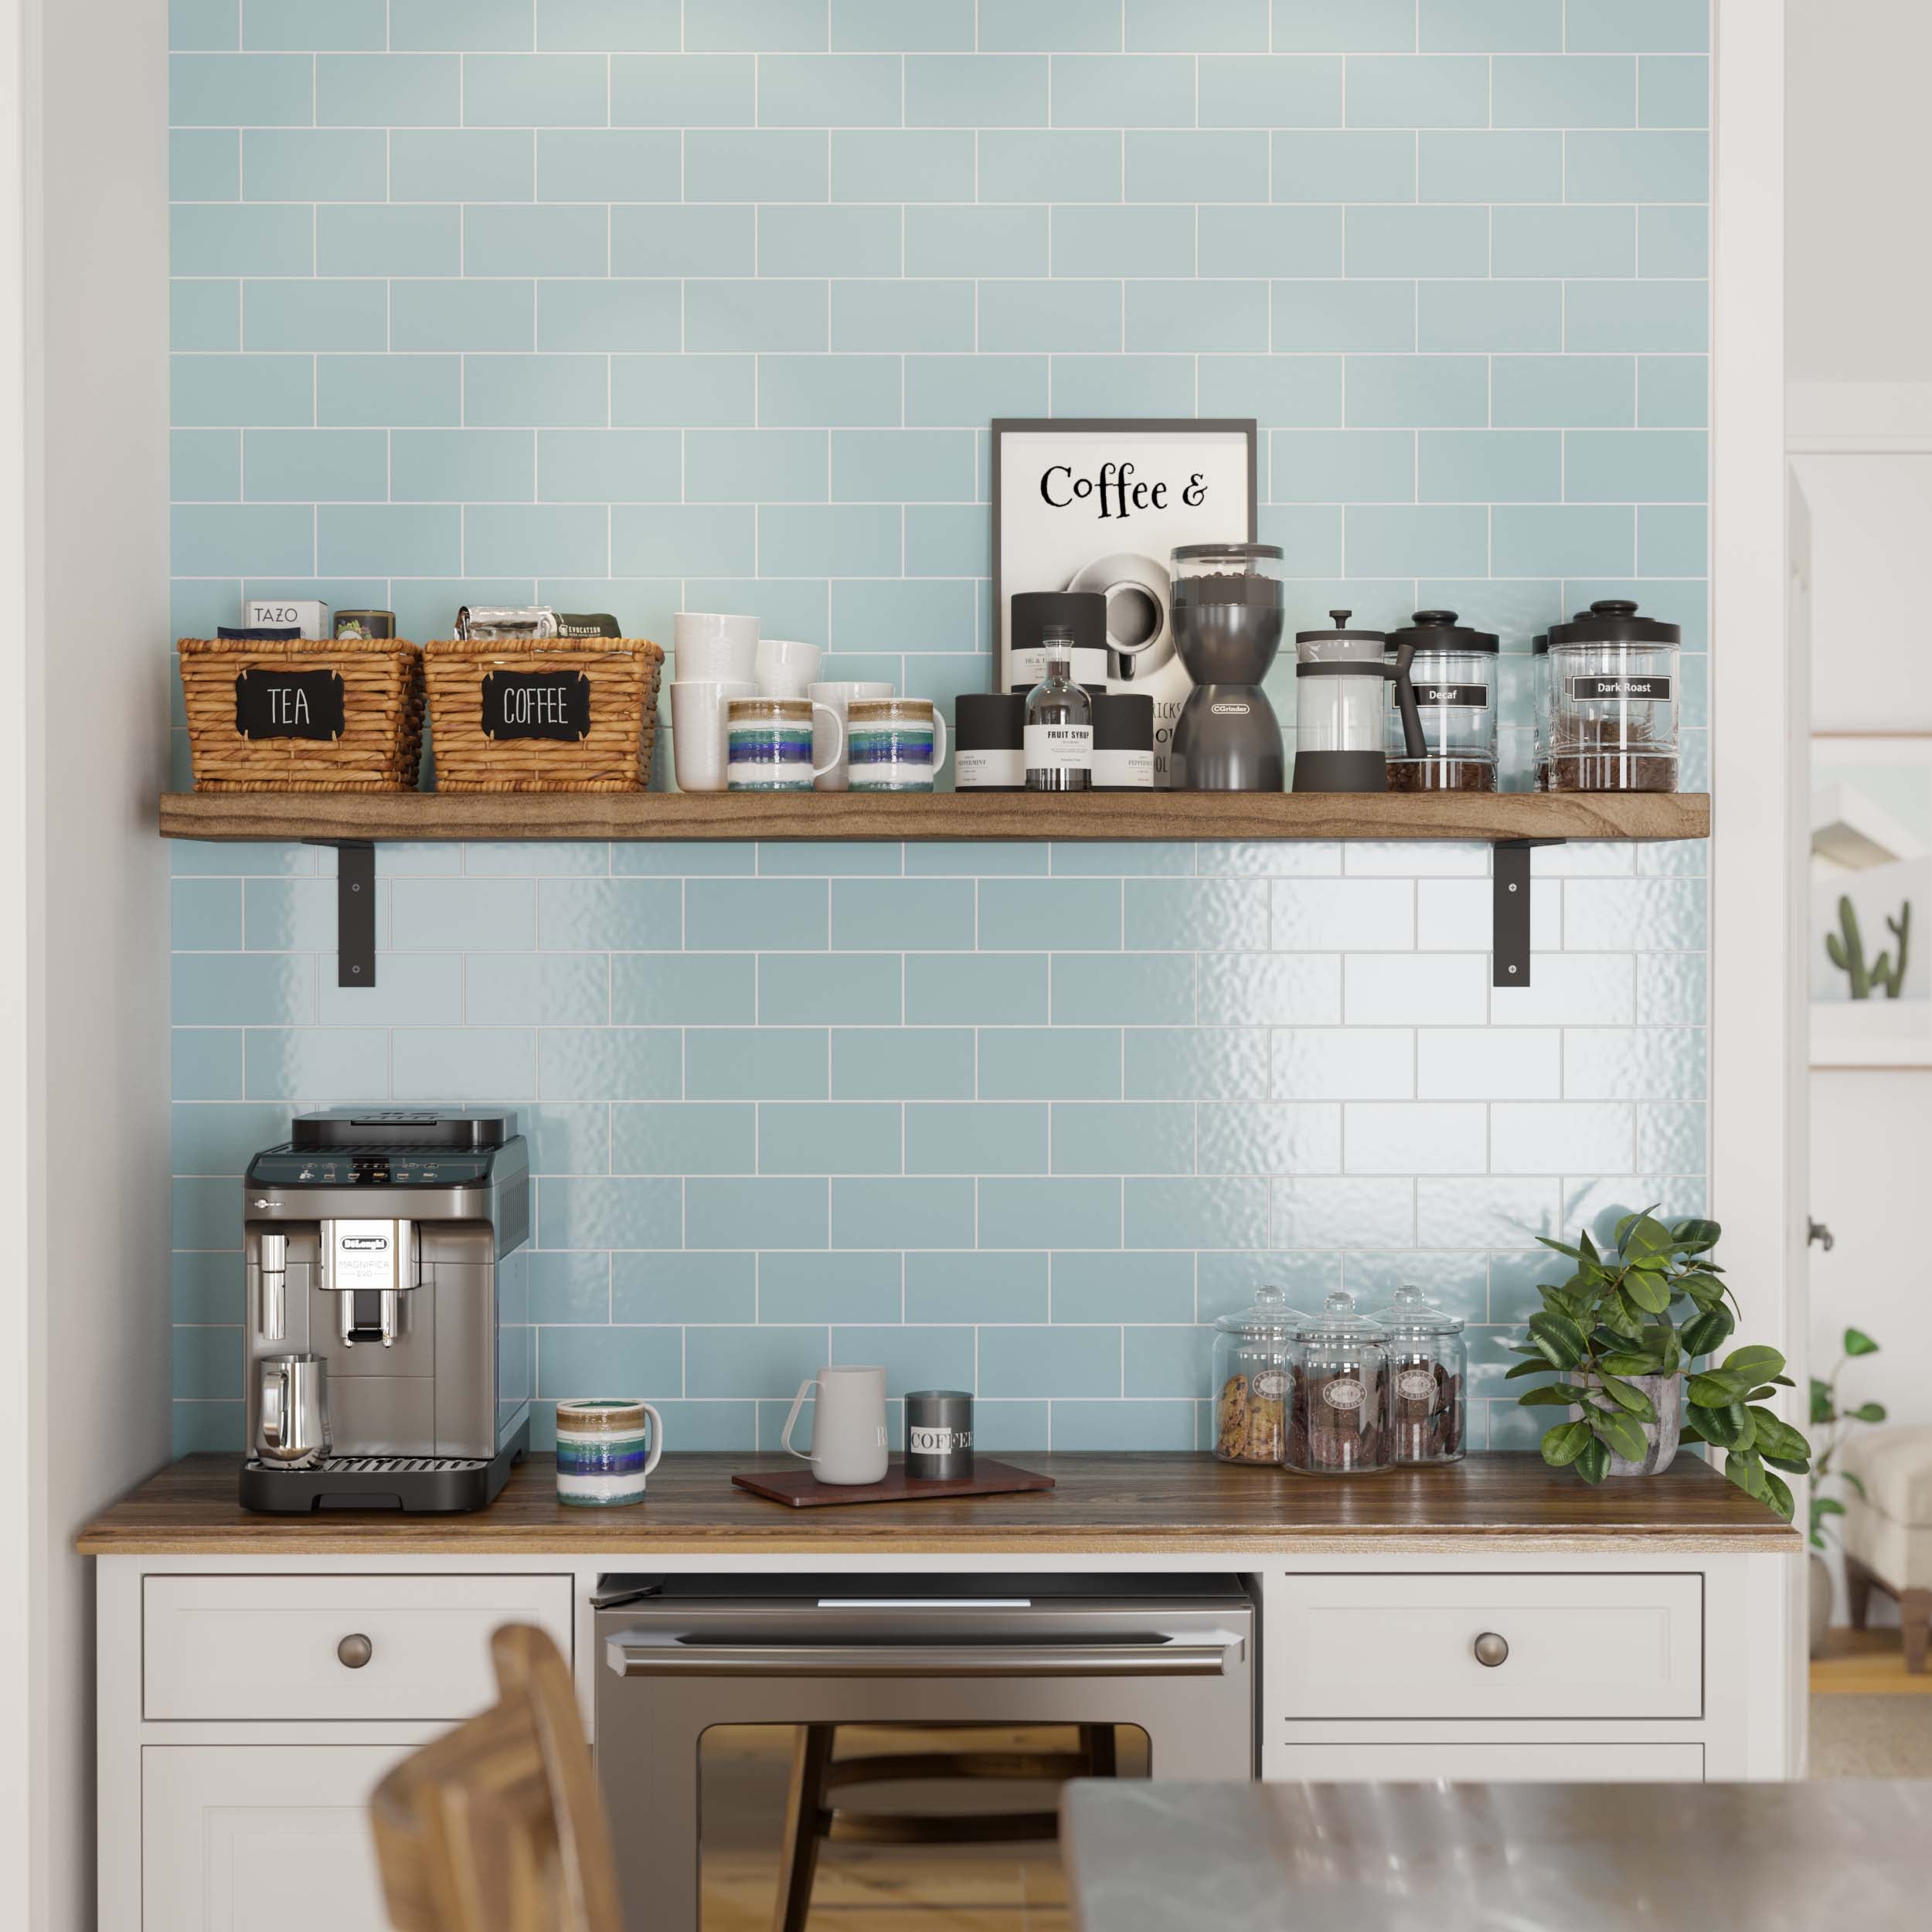 A cozy kitchen corner with a coffee station featuring a modern machine, mugs, and a shelving unit holding labeled baskets for tea and coffee, along with a plant.